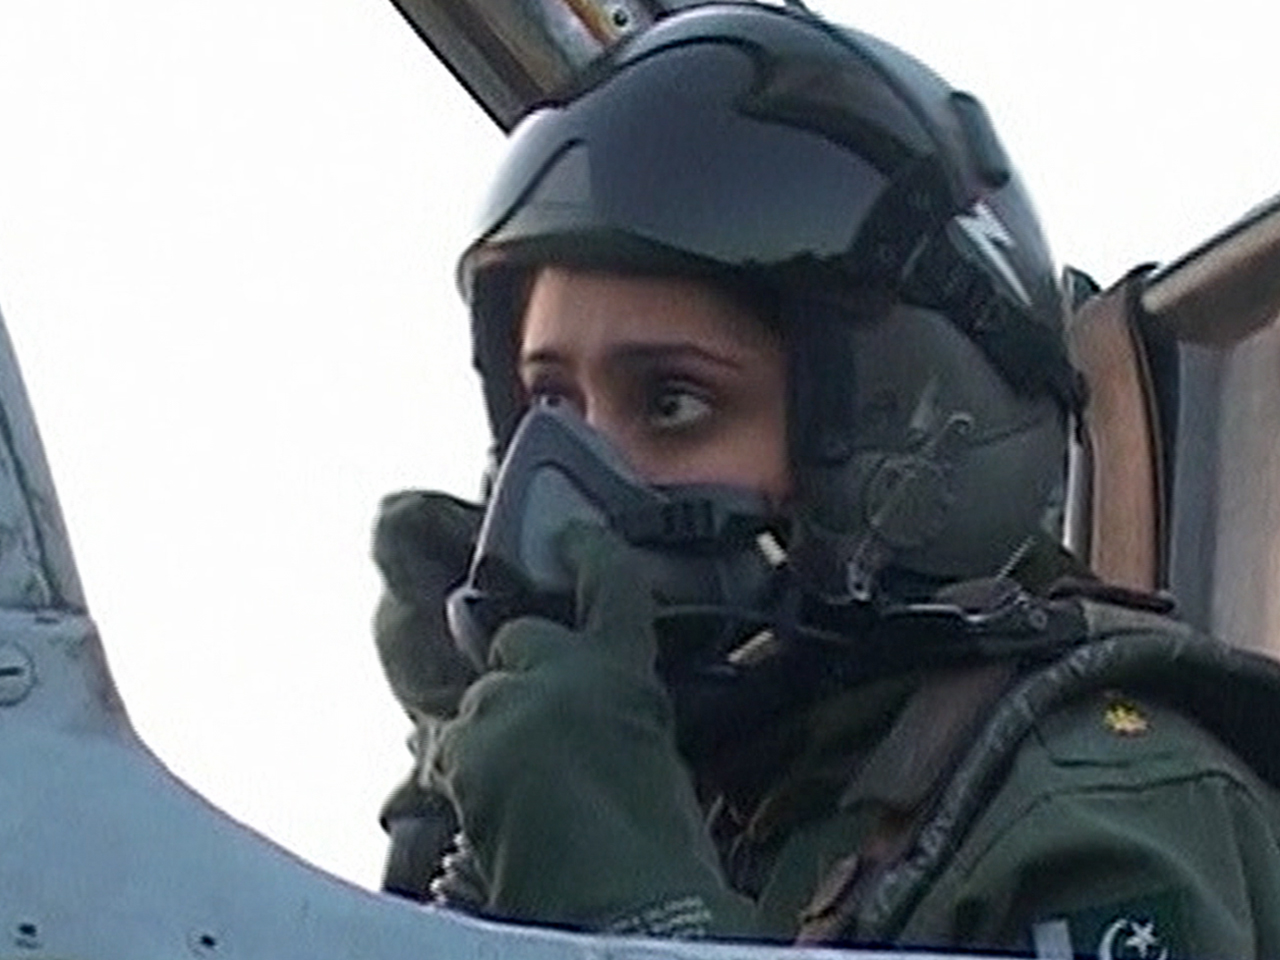 Pakistan air force welcomes first female pilot